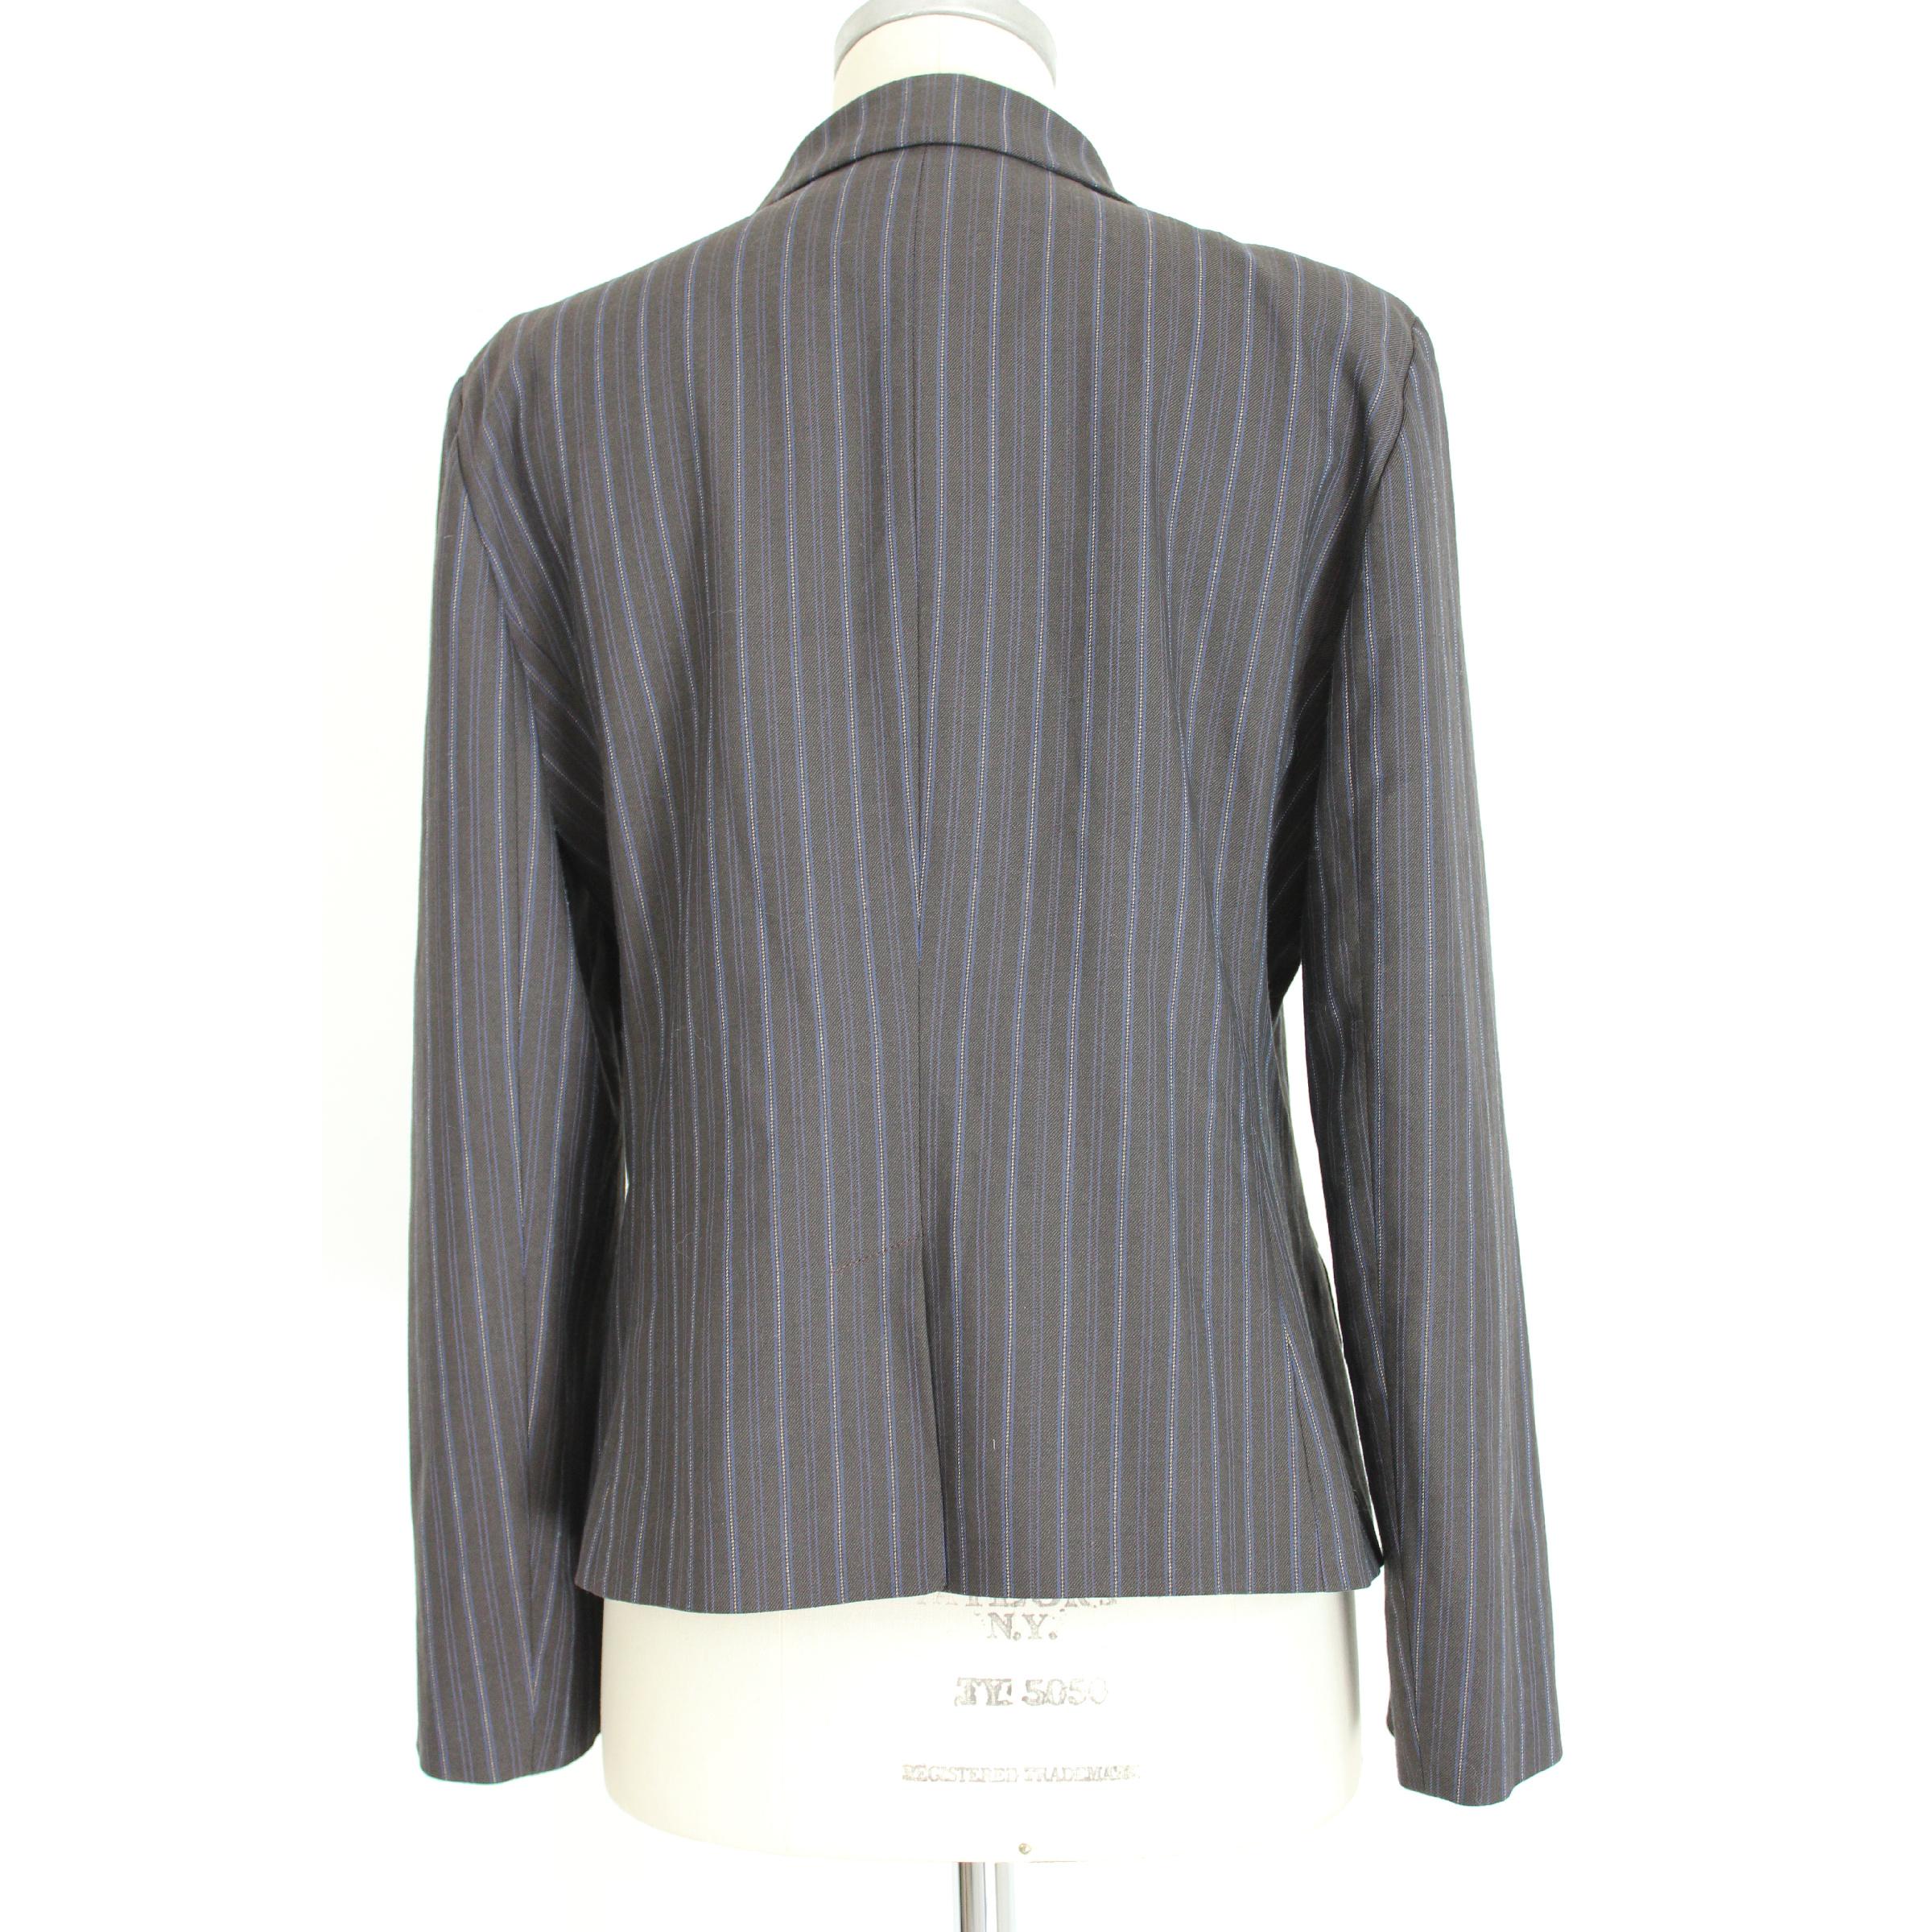 Moschino Jeans 90s vintage women's jacket, brown and pinstriped beige, 50% viscose 36% wool 9% polyamide 2% elastene 2% polyester 1% acetate. Buttons disappeared. Made in Italy. Excellent vintage condition.

Size: 48 It 14 Us 16 Uk

Shoulder: 48